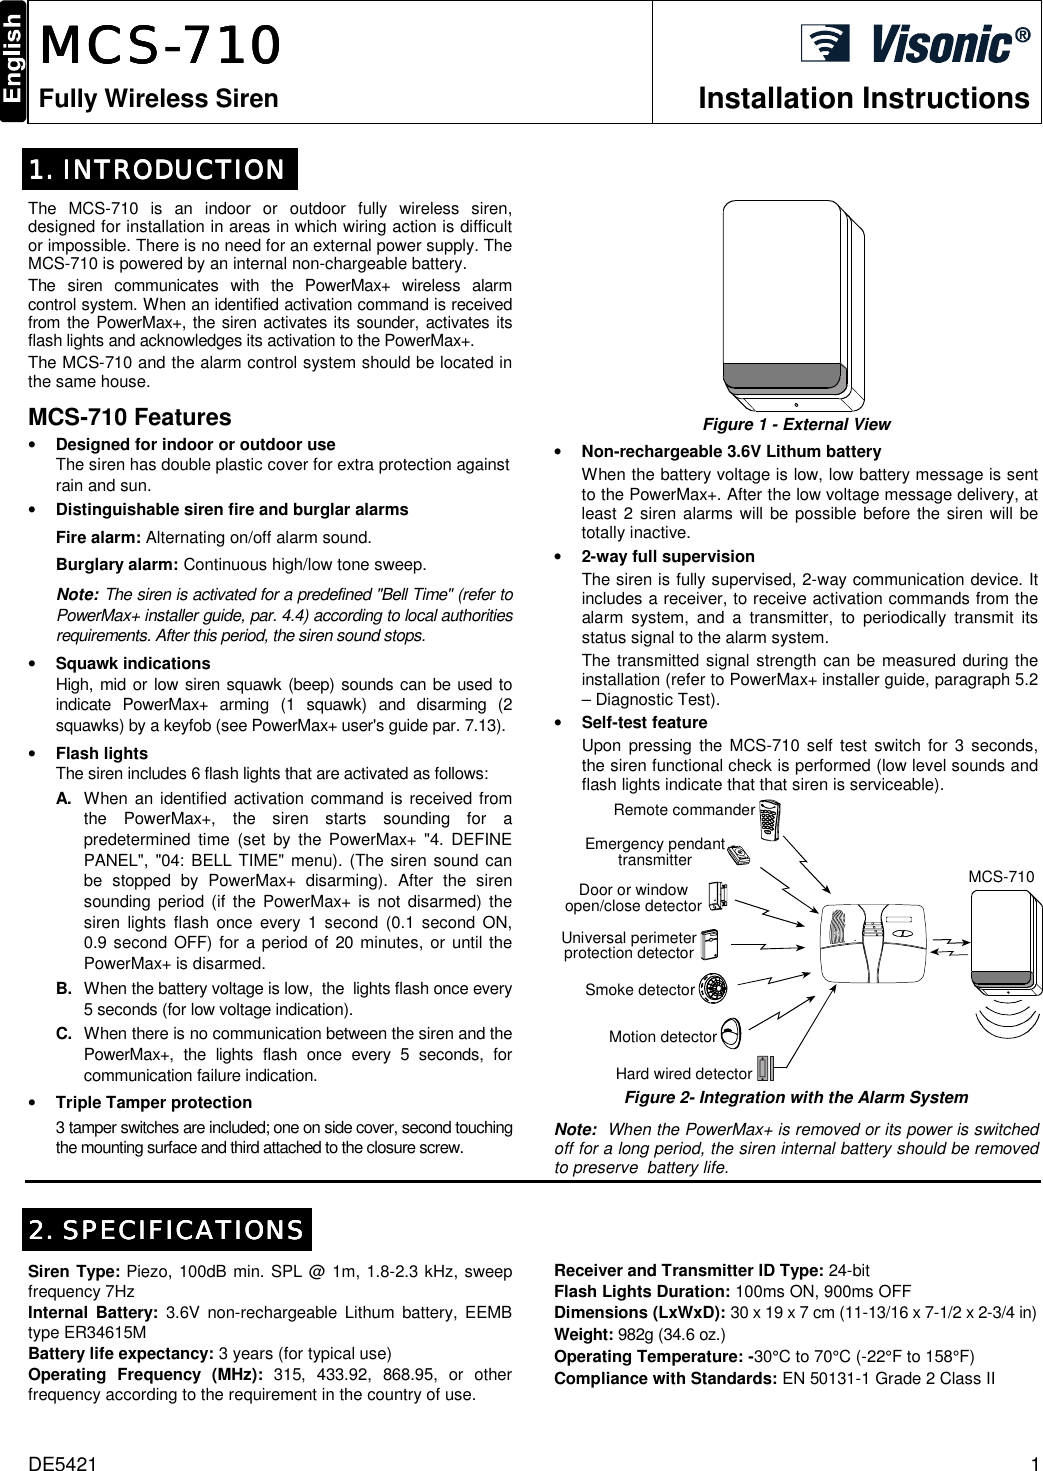 DE5421  1  MCSMCSMCSMCS----777711110000    Fully Wireless Siren Installation Instructions  1. INTRODUCTION1. INTRODUCTION1. INTRODUCTION1. INTRODUCTION    The MCS-710 is an indoor or outdoor fully wireless siren, designed for installation in areas in which wiring action is difficult or impossible. There is no need for an external power supply. The MCS-710 is powered by an internal non-chargeable battery.  The siren communicates with the PowerMax+ wireless alarm control system. When an identified activation command is received from the PowerMax+, the siren activates its sounder, activates its flash lights and acknowledges its activation to the PowerMax+. The MCS-710 and the alarm control system should be located in the same house. MCS-710 Features • Designed for indoor or outdoor use The siren has double plastic cover for extra protection against rain and sun. • Distinguishable siren fire and burglar alarms Fire alarm: Alternating on/off alarm sound. Burglary alarm: Continuous high/low tone sweep. Note: The siren is activated for a predefined &quot;Bell Time&quot; (refer to PowerMax+ installer guide, par. 4.4) according to local authorities requirements. After this period, the siren sound stops.  • Squawk indications High, mid or low siren squawk (beep) sounds can be used to indicate PowerMax+ arming (1 squawk) and disarming (2 squawks) by a keyfob (see PowerMax+ user&apos;s guide par. 7.13). • Flash lights The siren includes 6 flash lights that are activated as follows: A.  When an identified activation command is received from the PowerMax+, the siren starts sounding for a predetermined time (set by the PowerMax+ &quot;4. DEFINE PANEL&quot;, &quot;04: BELL TIME&quot; menu). (The siren sound can be stopped by PowerMax+ disarming). After the siren sounding period (if the PowerMax+ is not disarmed) the siren lights flash once every 1 second (0.1 second ON, 0.9 second OFF) for a period of 20 minutes, or until the PowerMax+ is disarmed. B.  When the battery voltage is low,  the  lights flash once every 5 seconds (for low voltage indication).  C.  When there is no communication between the siren and the PowerMax+, the lights flash once every 5 seconds, for communication failure indication. • Triple Tamper protection 3 tamper switches are included; one on side cover, second touching the mounting surface and third attached to the closure screw.    Figure 1 - External View • Non-rechargeable 3.6V Lithum battery When the battery voltage is low, low battery message is sent to the PowerMax+. After the low voltage message delivery, at least 2 siren alarms will be possible before the siren will be totally inactive.  • 2-way full supervision The siren is fully supervised, 2-way communication device. It includes a receiver, to receive activation commands from the alarm system, and a transmitter, to periodically transmit its status signal to the alarm system. The transmitted signal strength can be measured during the installation (refer to PowerMax+ installer guide, paragraph 5.2 – Diagnostic Test). • Self-test feature Upon pressing the MCS-710 self test switch for 3 seconds, the siren functional check is performed (low level sounds and flash lights indicate that that siren is serviceable). MCS-710Hard wired detectorEmergency pendanttransmitterSmoke detectorUniversal perimeterprotection detectorDoor or windowopen/close detectorMotion detectorRemote commander Figure 2- Integration with the Alarm System Note:  When the PowerMax+ is removed or its power is switched off for a long period, the siren internal battery should be removed to preserve  battery life.   2. SPECIFICATIONS2. SPECIFICATIONS2. SPECIFICATIONS2. SPECIFICATIONS    Siren Type: Piezo, 100dB min. SPL @ 1m, 1.8-2.3 kHz, sweep frequency 7Hz Internal Battery: 3.6V non-rechargeable Lithum battery, EEMB type ER34615M  Battery life expectancy: 3 years (for typical use) Operating Frequency (MHz): 315, 433.92, 868.95, or other frequency according to the requirement in the country of use.  Receiver and Transmitter ID Type: 24-bit Flash Lights Duration: 100ms ON, 900ms OFF Dimensions (LxWxD): 30 x 19 x 7 cm (11-13/16 x 7-1/2 x 2-3/4 in)  Weight: 982g (34.6 oz.) Operating Temperature: -30°C to 70°C (-22°F to 158°F) Compliance with Standards: EN 50131-1 Grade 2 Class II   